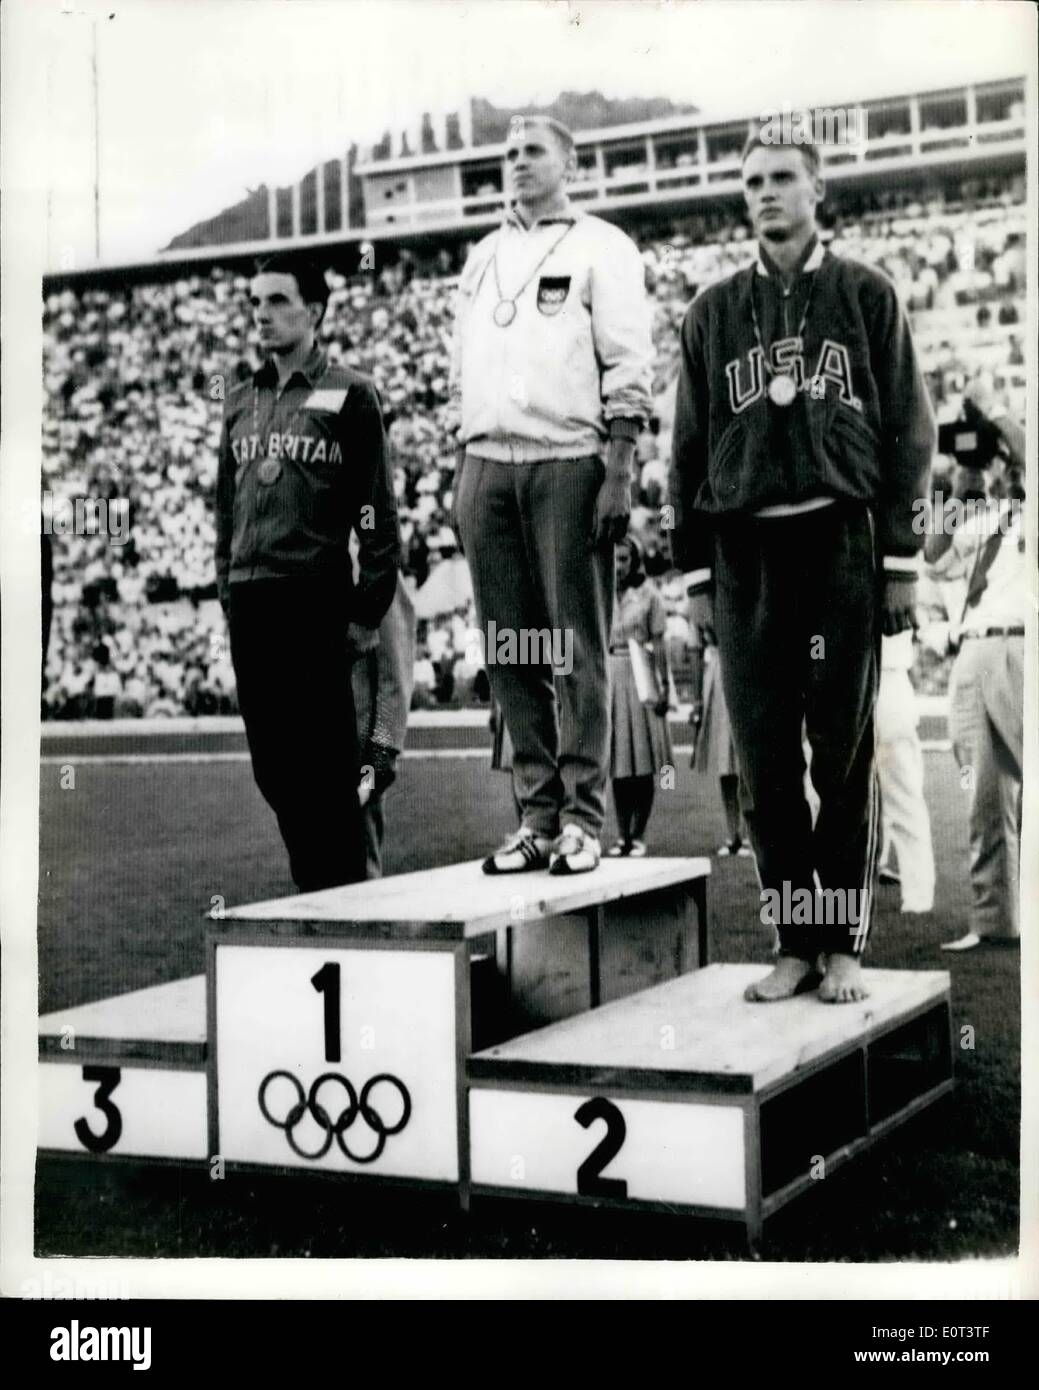 Sep. 09, 1960 - Olympic Games In Rome Bronze Medal For Radford in 100 meters Final; Armin Hart, of Germany, the world record holder, today won the Olympic 100 meters Final in 10.2 secs. which equaled the Olympic record he set up yesterday. Dave Sime (U.S.A), was second, and Peter Radford of Great Britain, was third. Photo Shows Picture on the rostrum after the presentation of medals are Armin Hary, centre (Gold Medal); Dave Sime, (on right - Silver Medal). and Peter Radford (left-Bronze Medal). in Rome Italy. Stock Photo